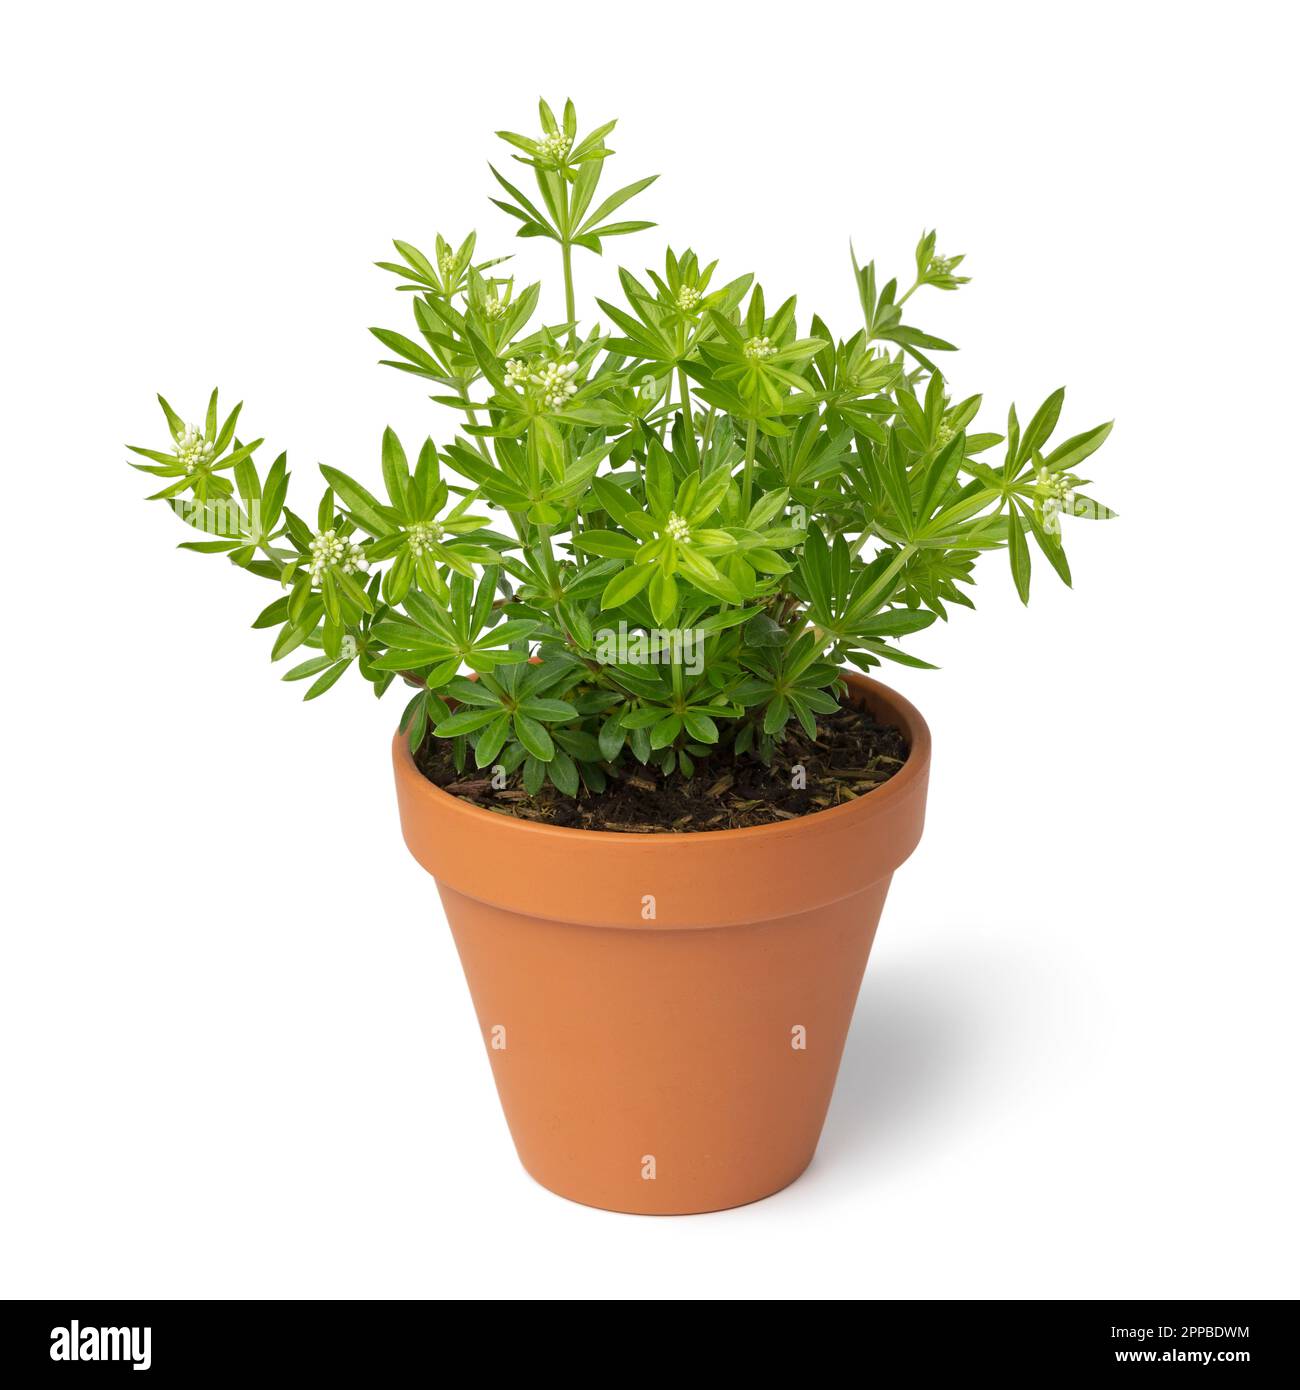 Plant pot with fresh green sweet woodruff plant with white buds close up isolated on white background Stock Photo